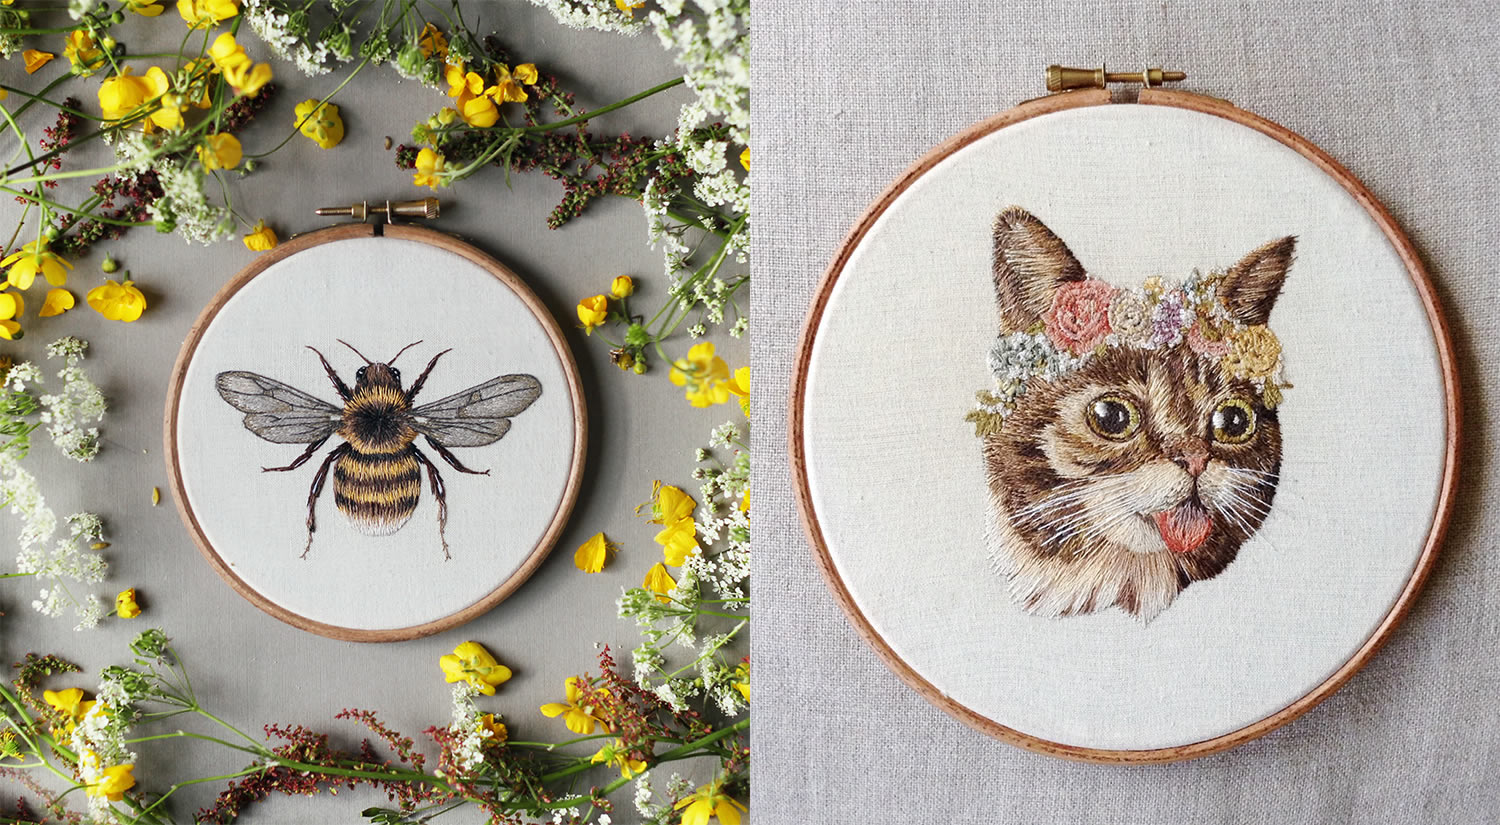 embroidery wallpaper,needlework,insect,honeybee,cat,embroidery